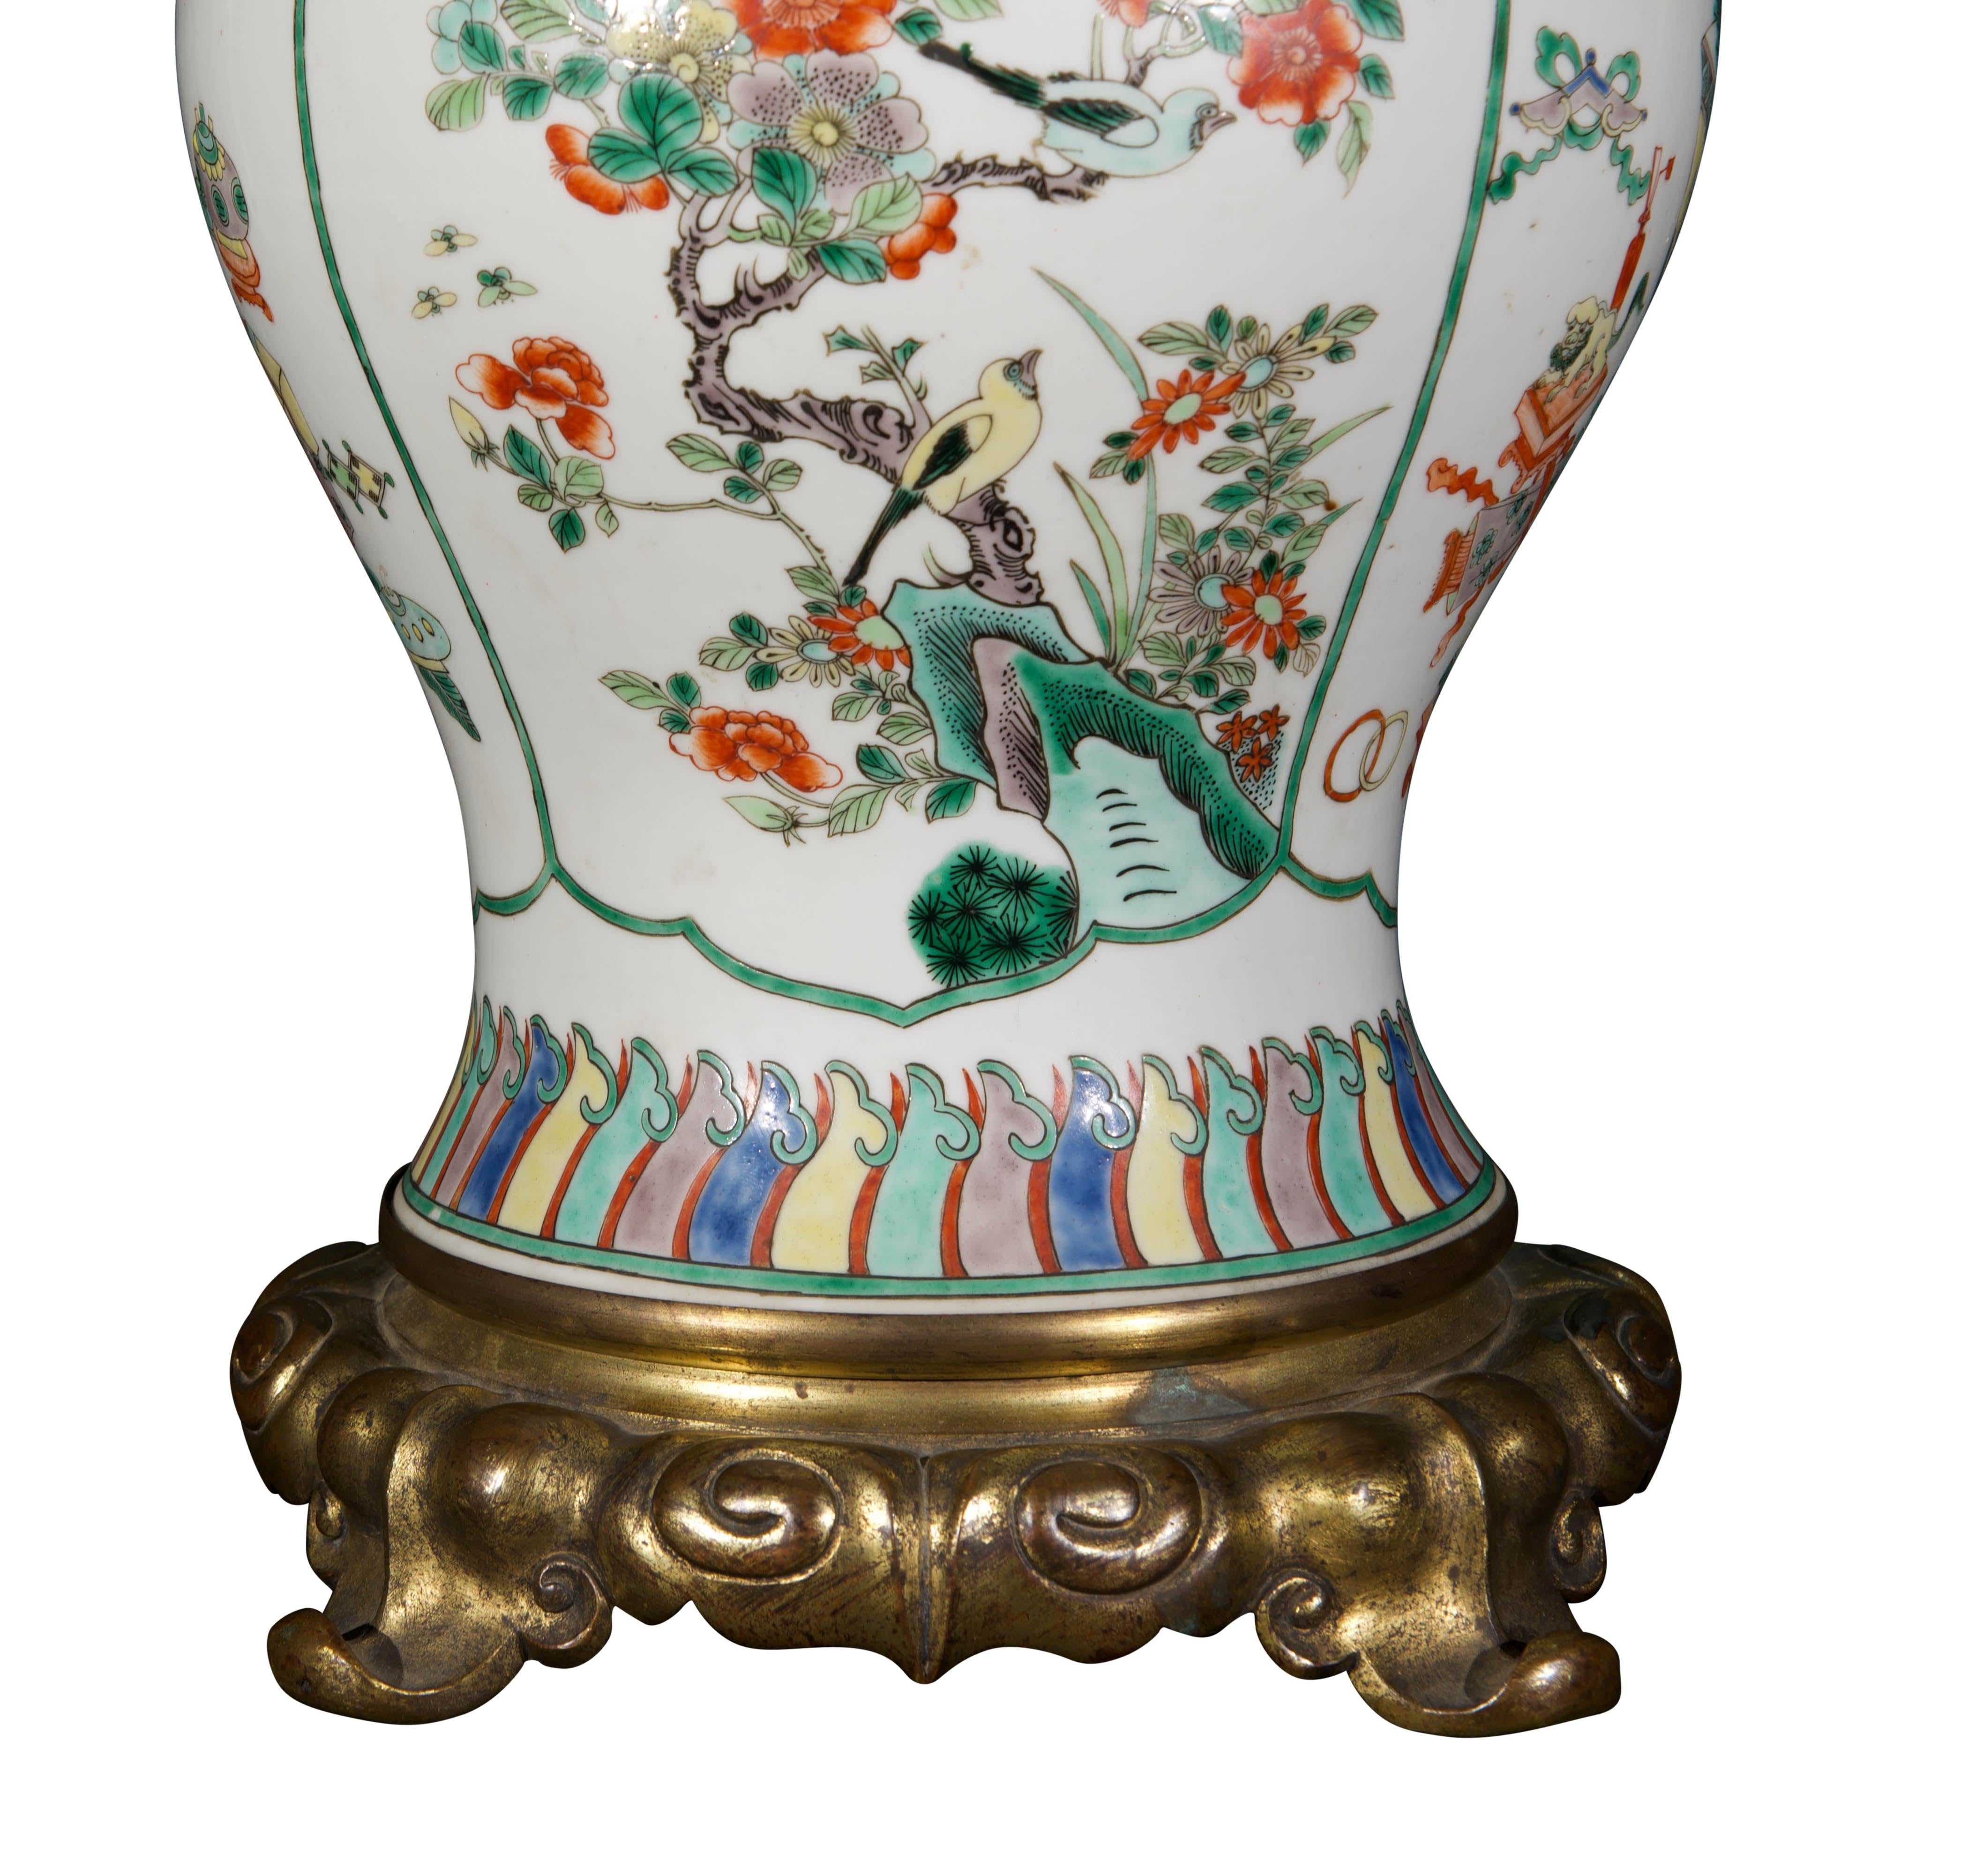 19th Century Chinese Famille Verte Baluster Porcelain Antique Table Lamp In Good Condition For Sale In London, GB